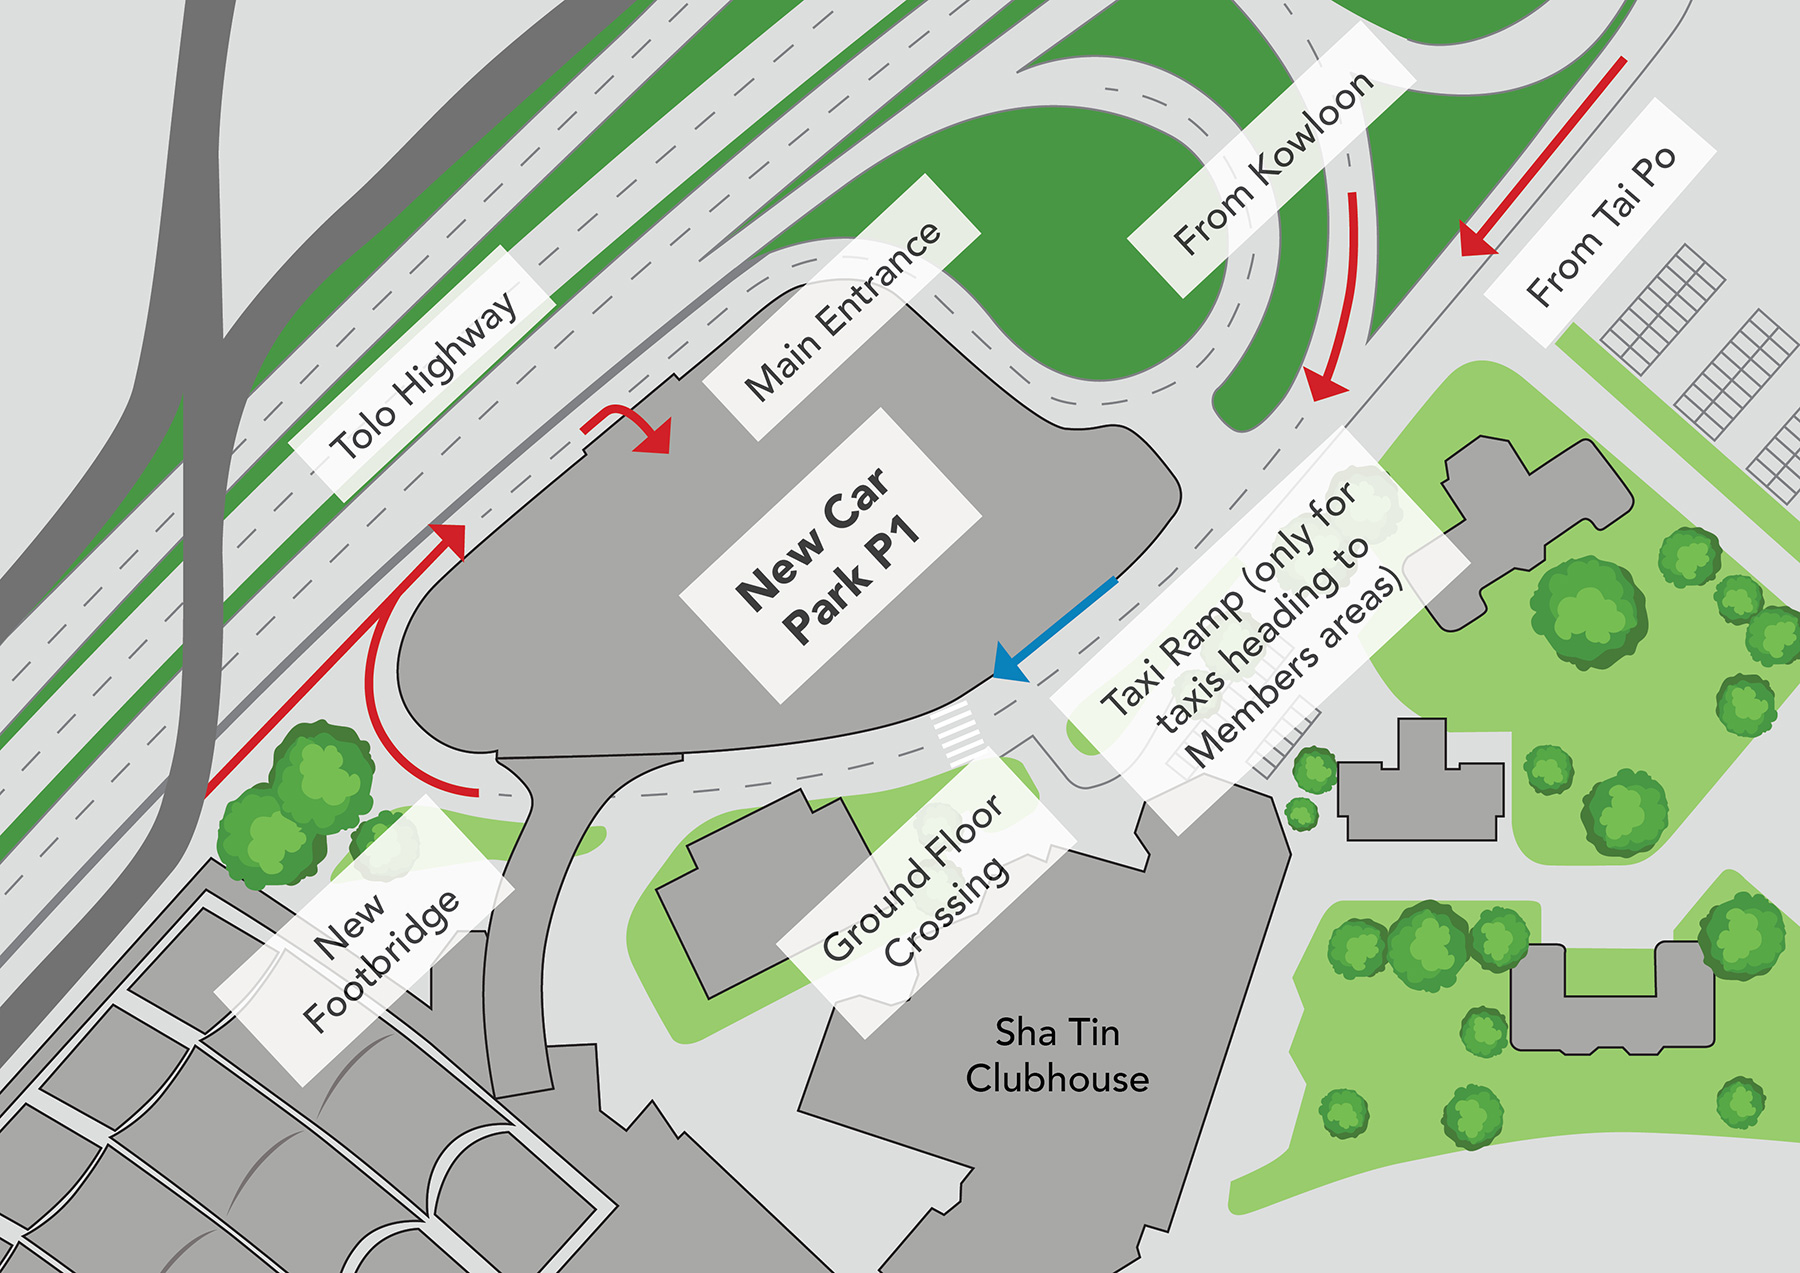 The new P1 Car Park smoothens the traffic flow for vehicles entering Sha Tin Racecourse especially on major racedays. Taxis heading to Members area are diverted to a taxi ramp from the G/F of the new car park to dedicated drop-off and pick-up bays on the 1/F.